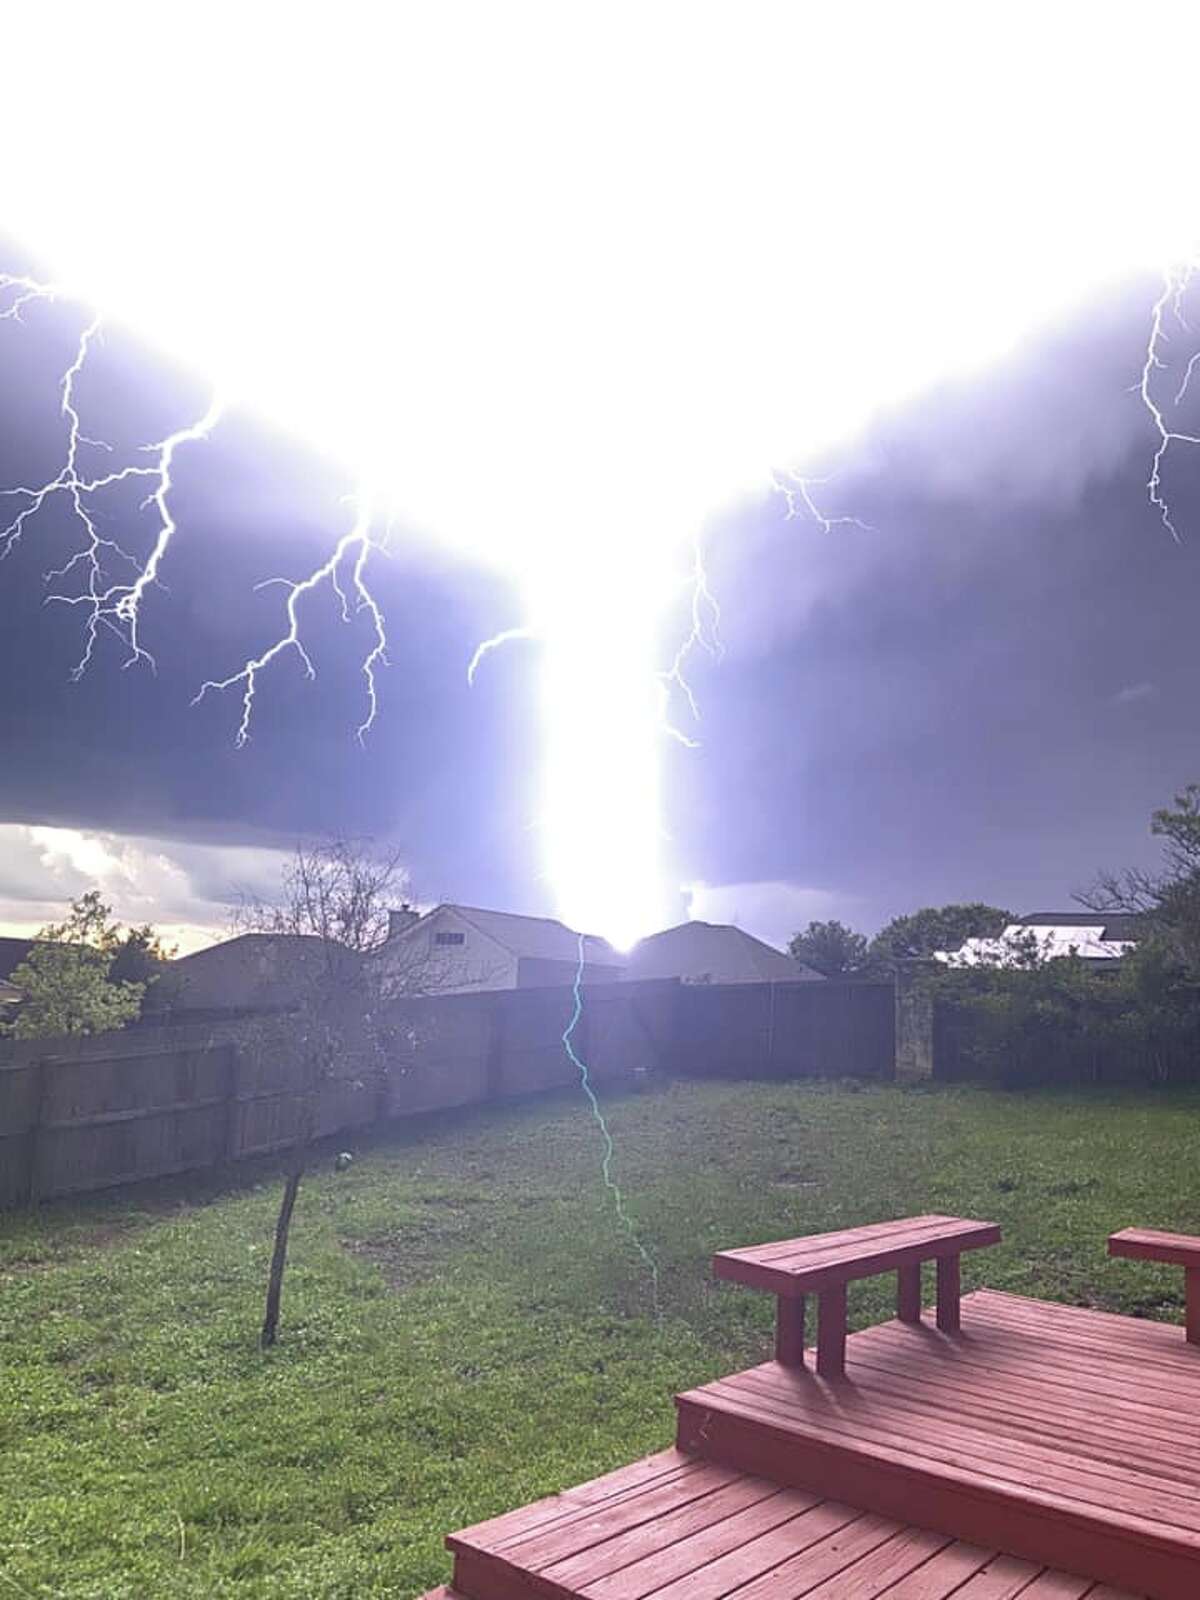 Matt and Ashley Trevino shared this photo taken May 27, 2020, in Stone Oak area during Wednesday night's storm.